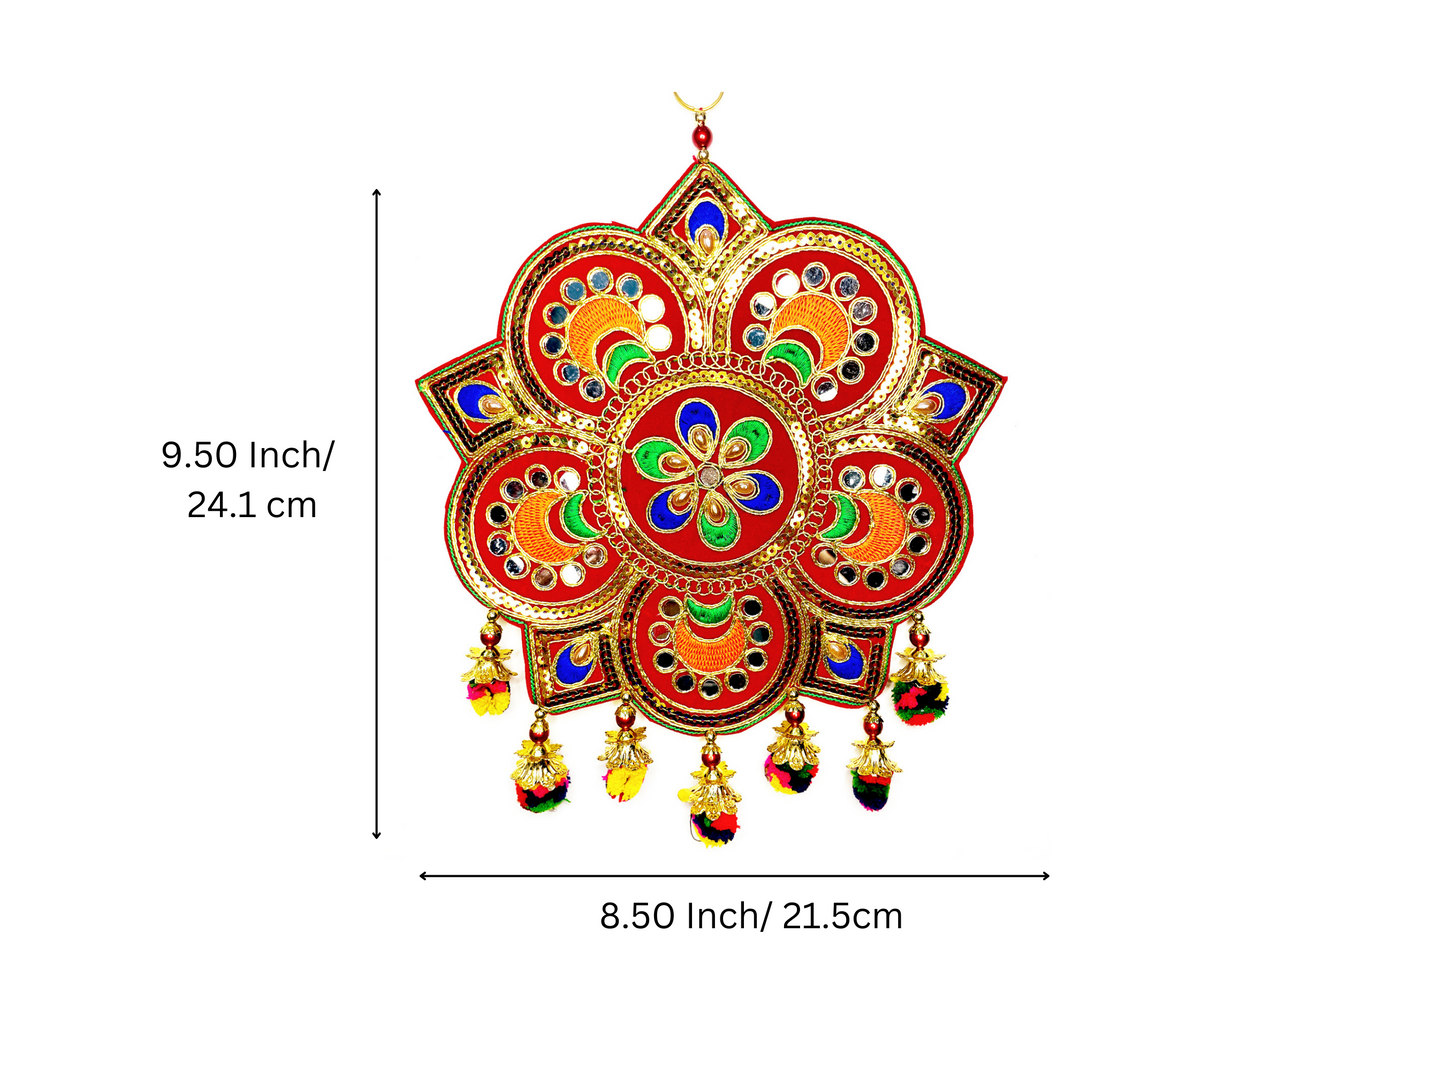 A set of 2 pieces, Star Rangoli with Tassels and Mirror work Colorful Wall hangings Pooja Festive Home door decoration